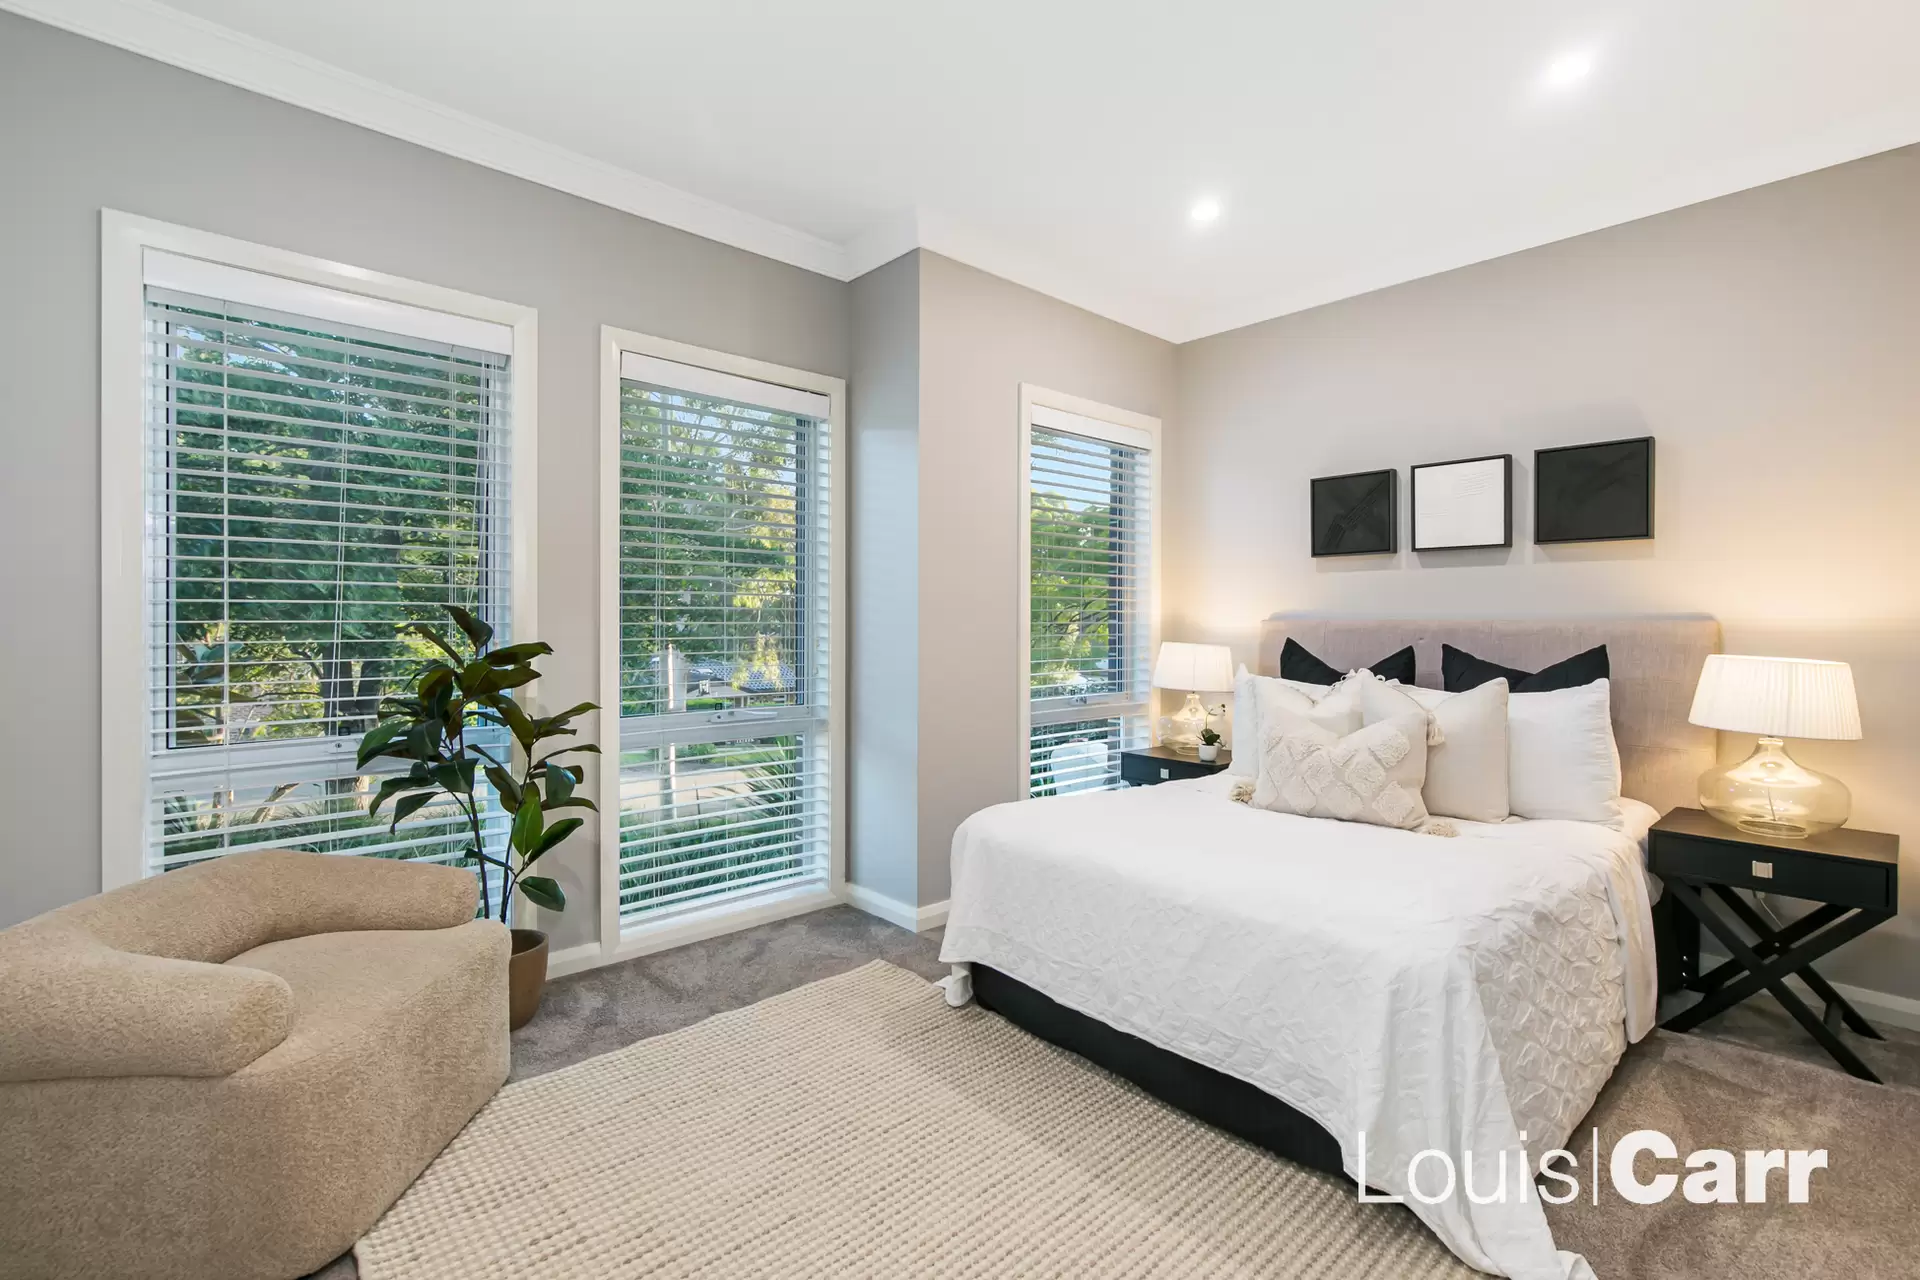 Photo #9: 151 Oratava Avenue, West Pennant Hills - Sold by Louis Carr Real Estate